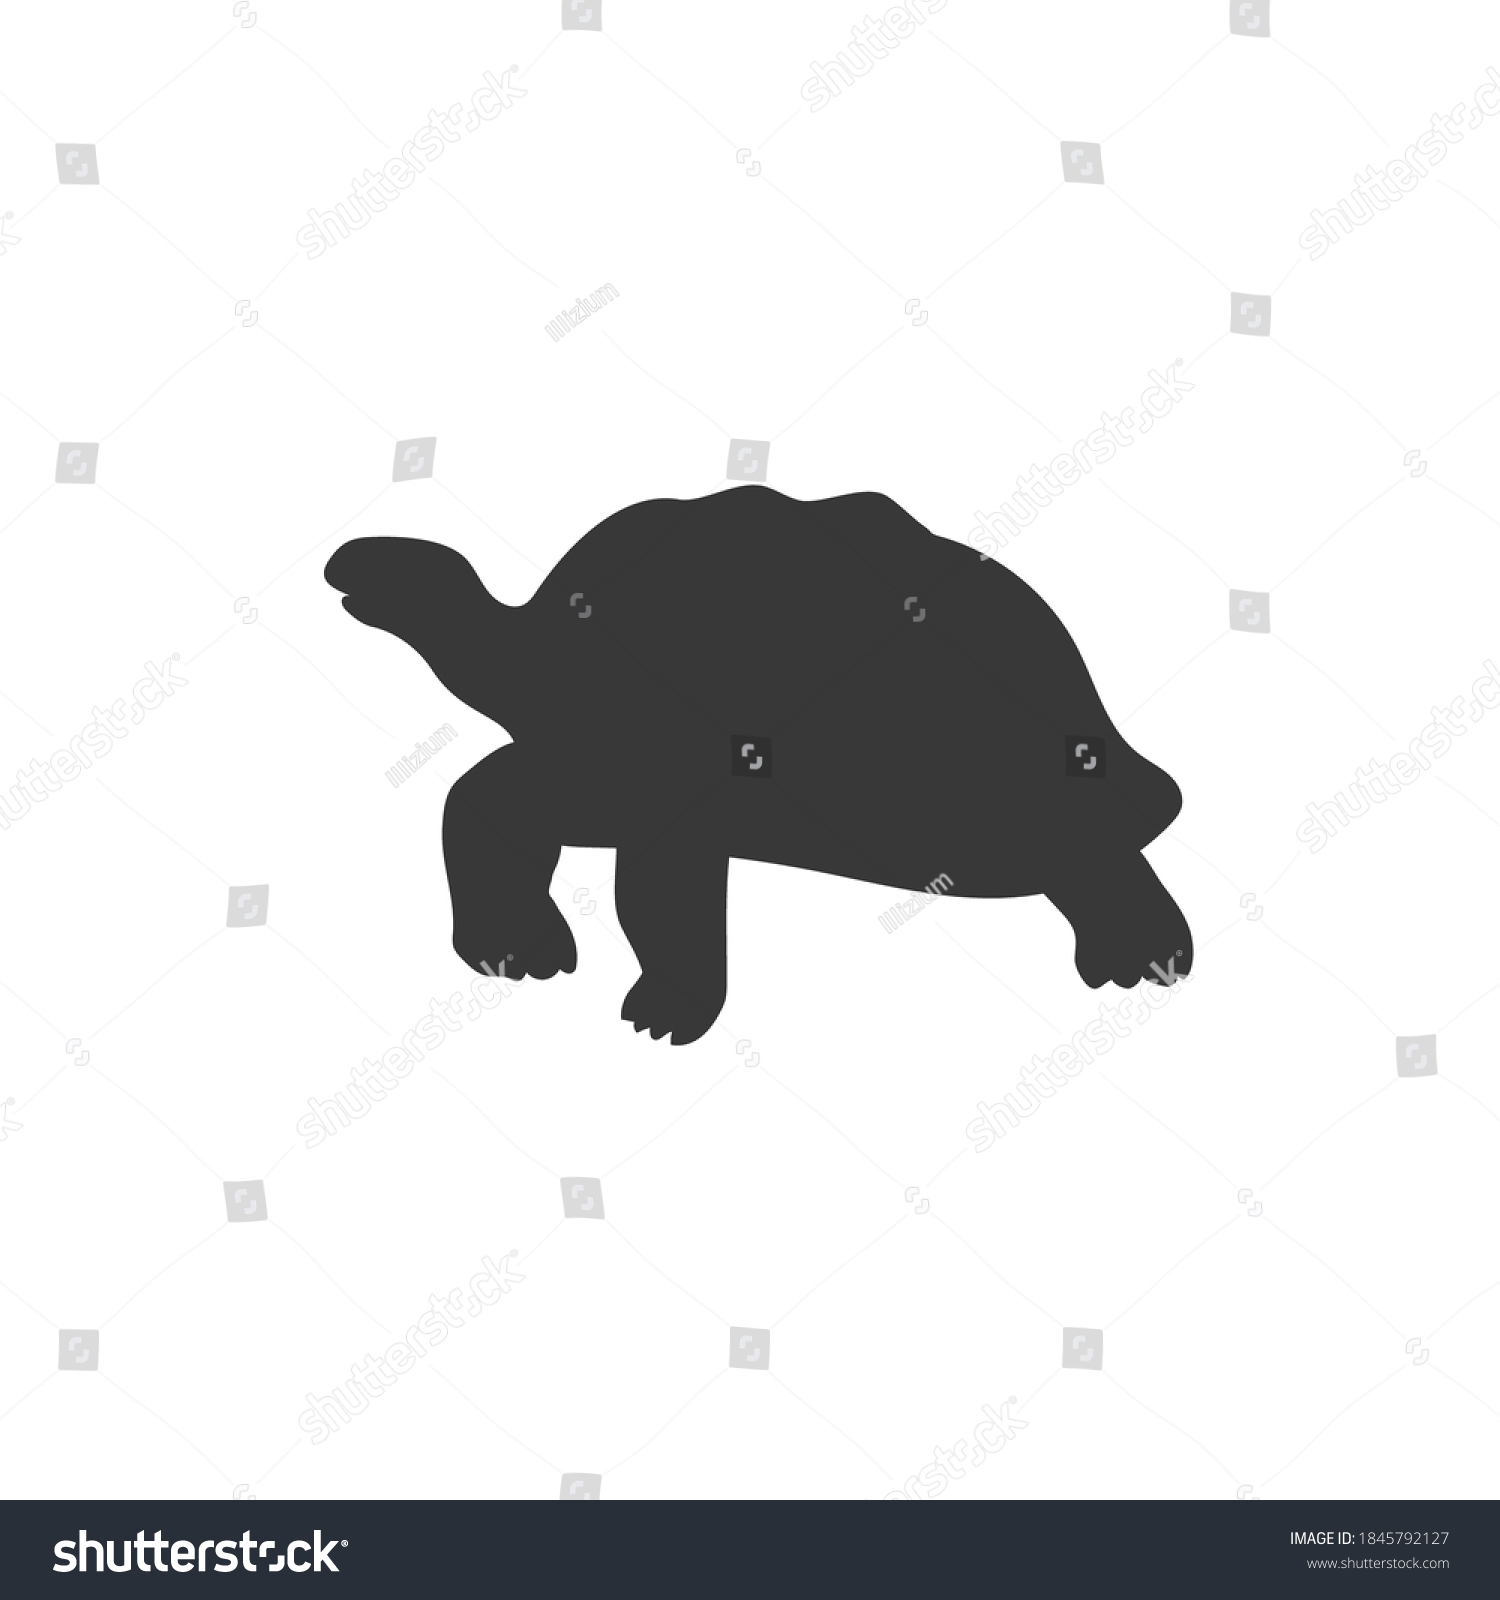 SVG of Turtle icon, vector illustration in flat svg